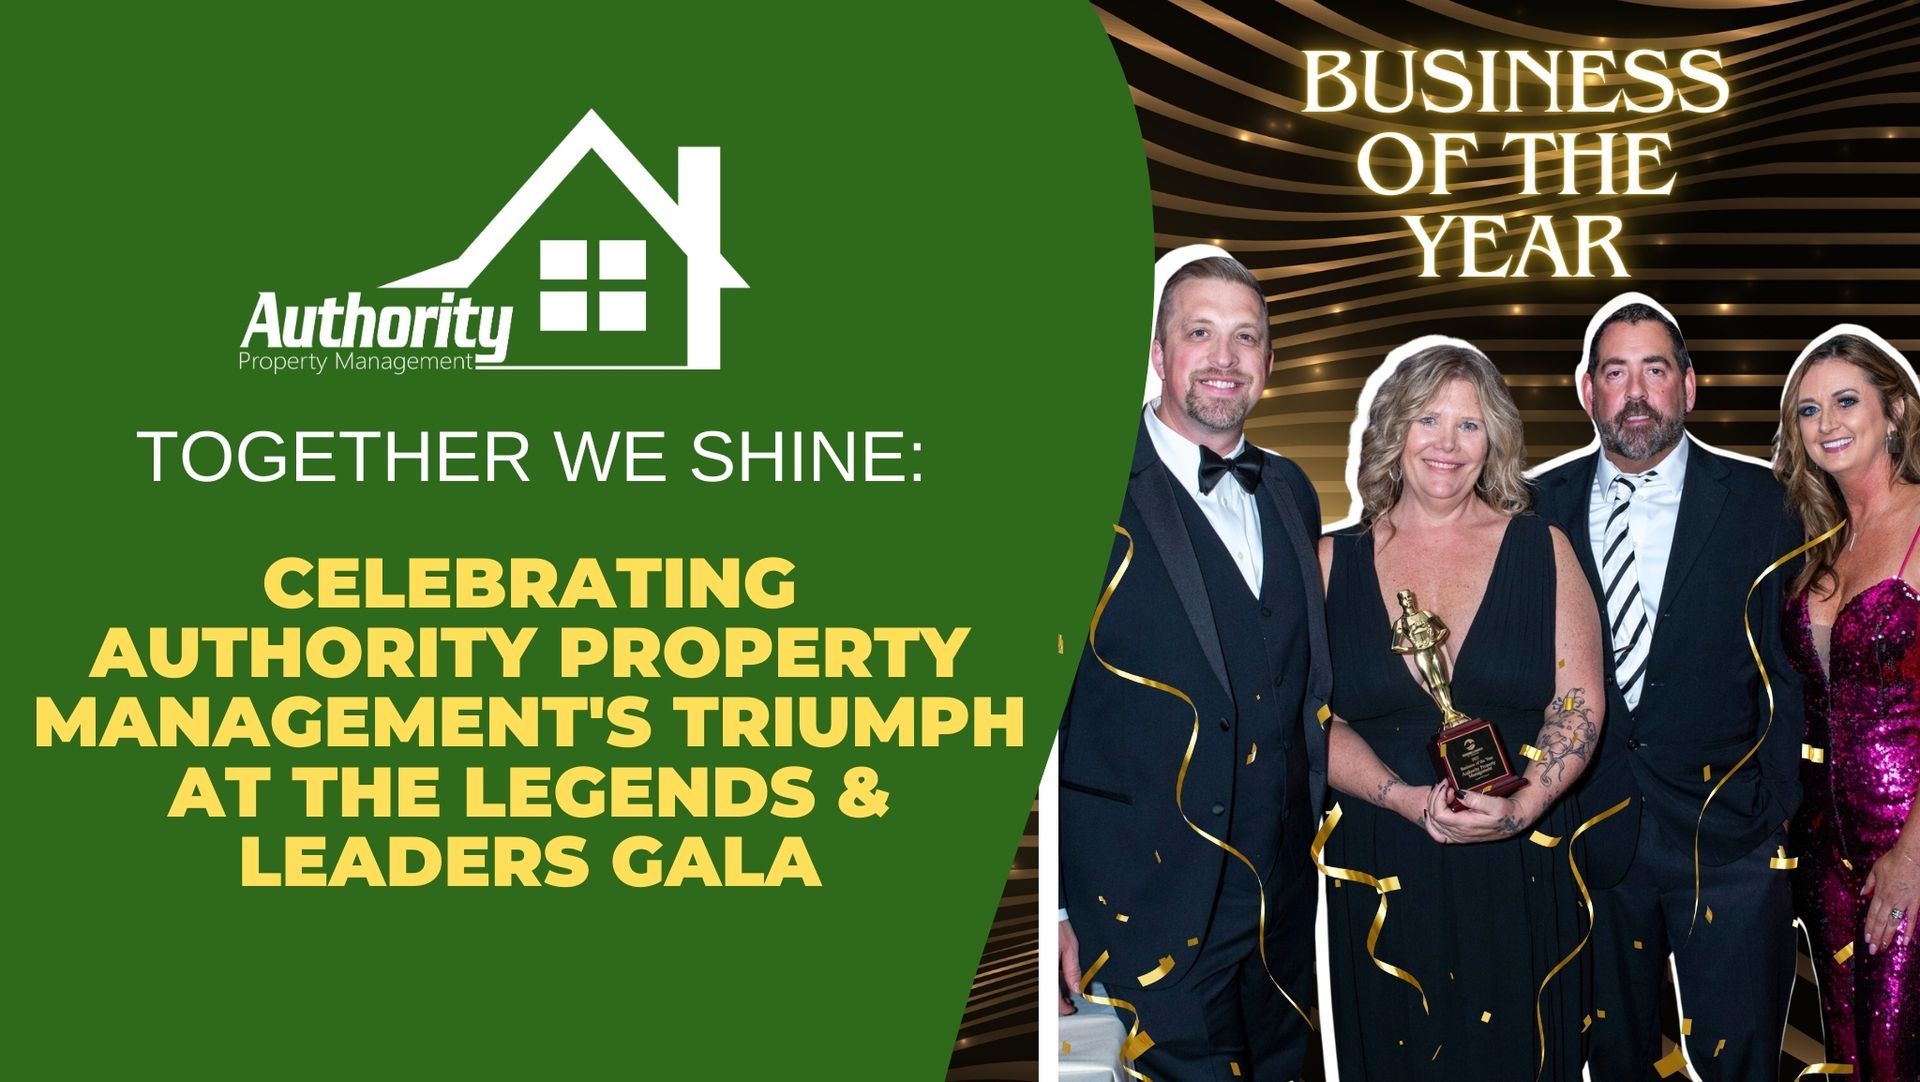 Authority Property Management wins Business of the Year Award